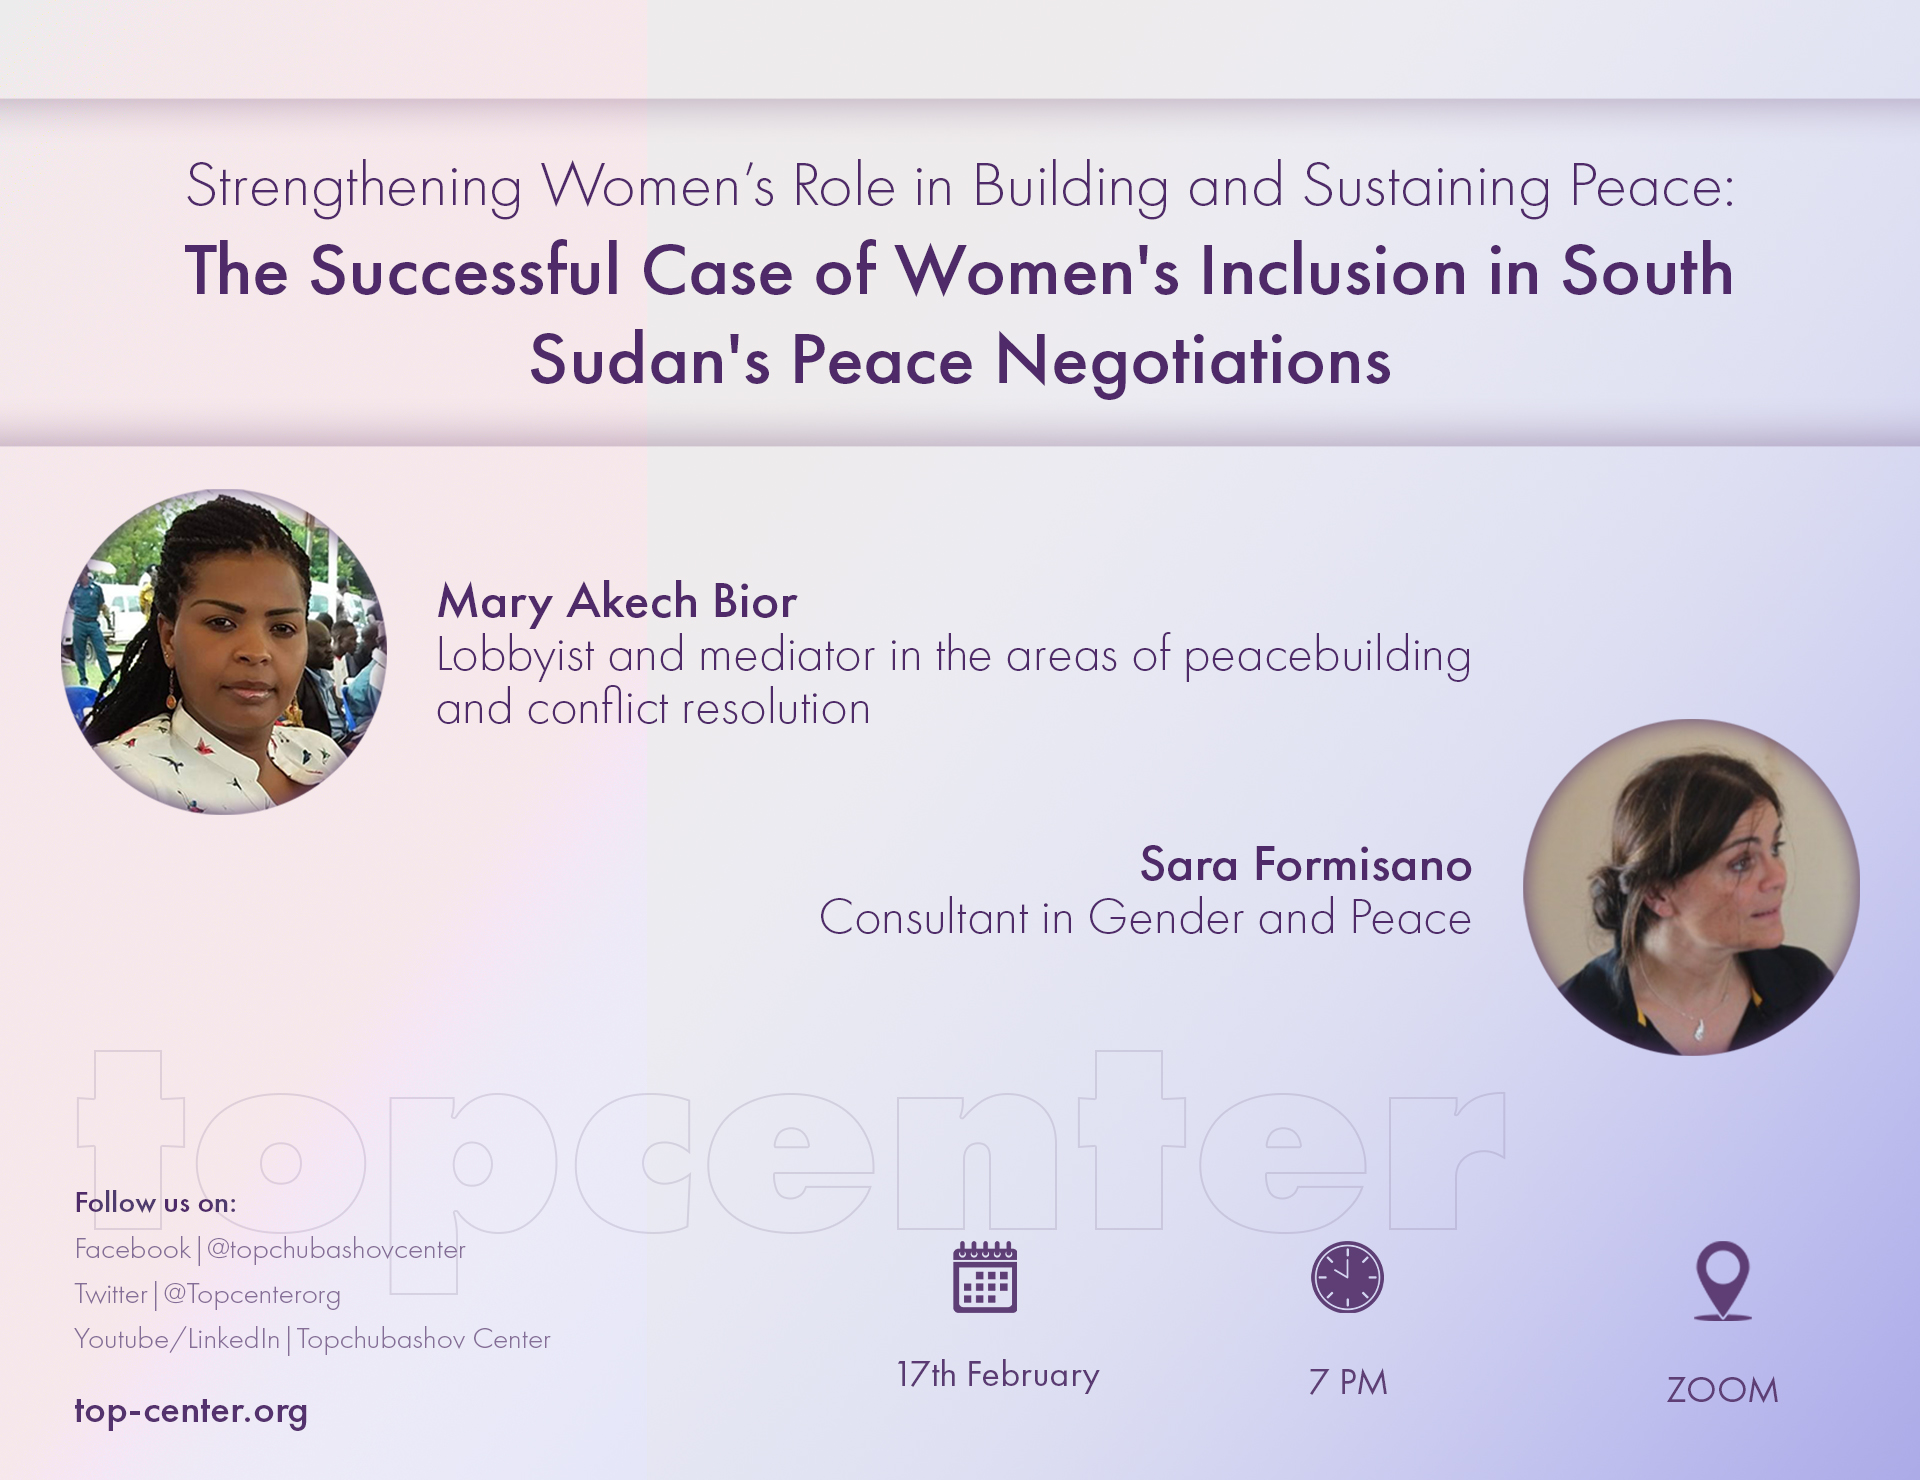 Strengthening Women’s Role in Building and Sustaining Peace: the Successful Case of Women's Inclusion in South Sudan's Peace Negotiations